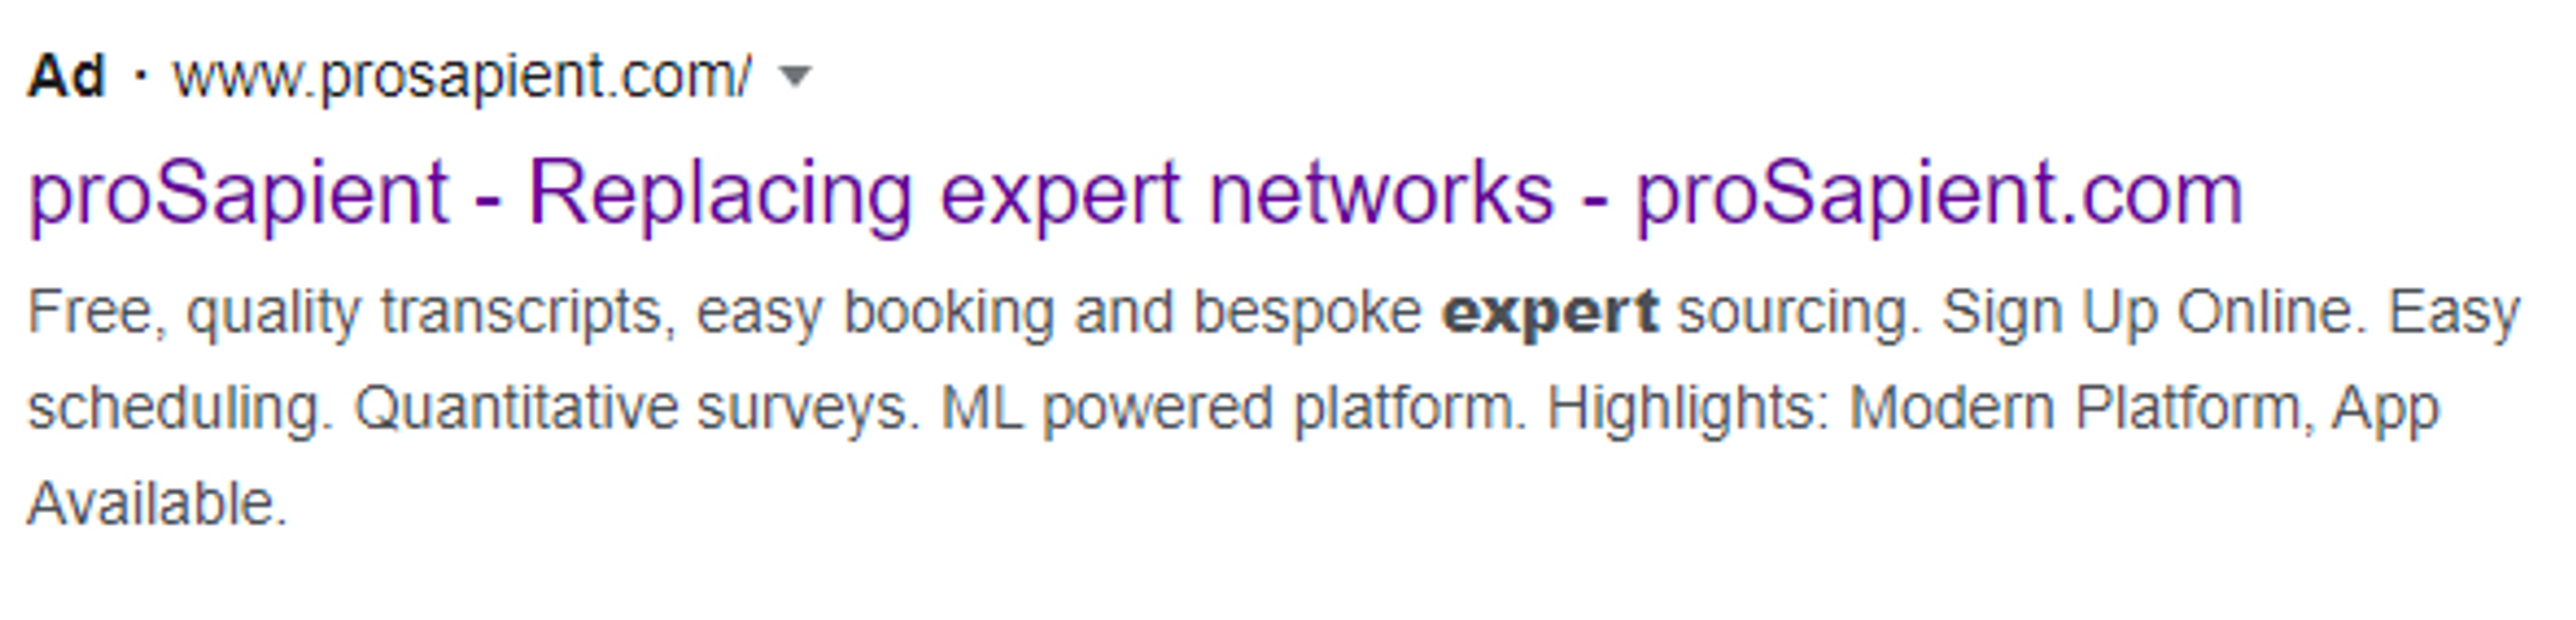 Prosapient advertisement, stating that it is replacing expert networks